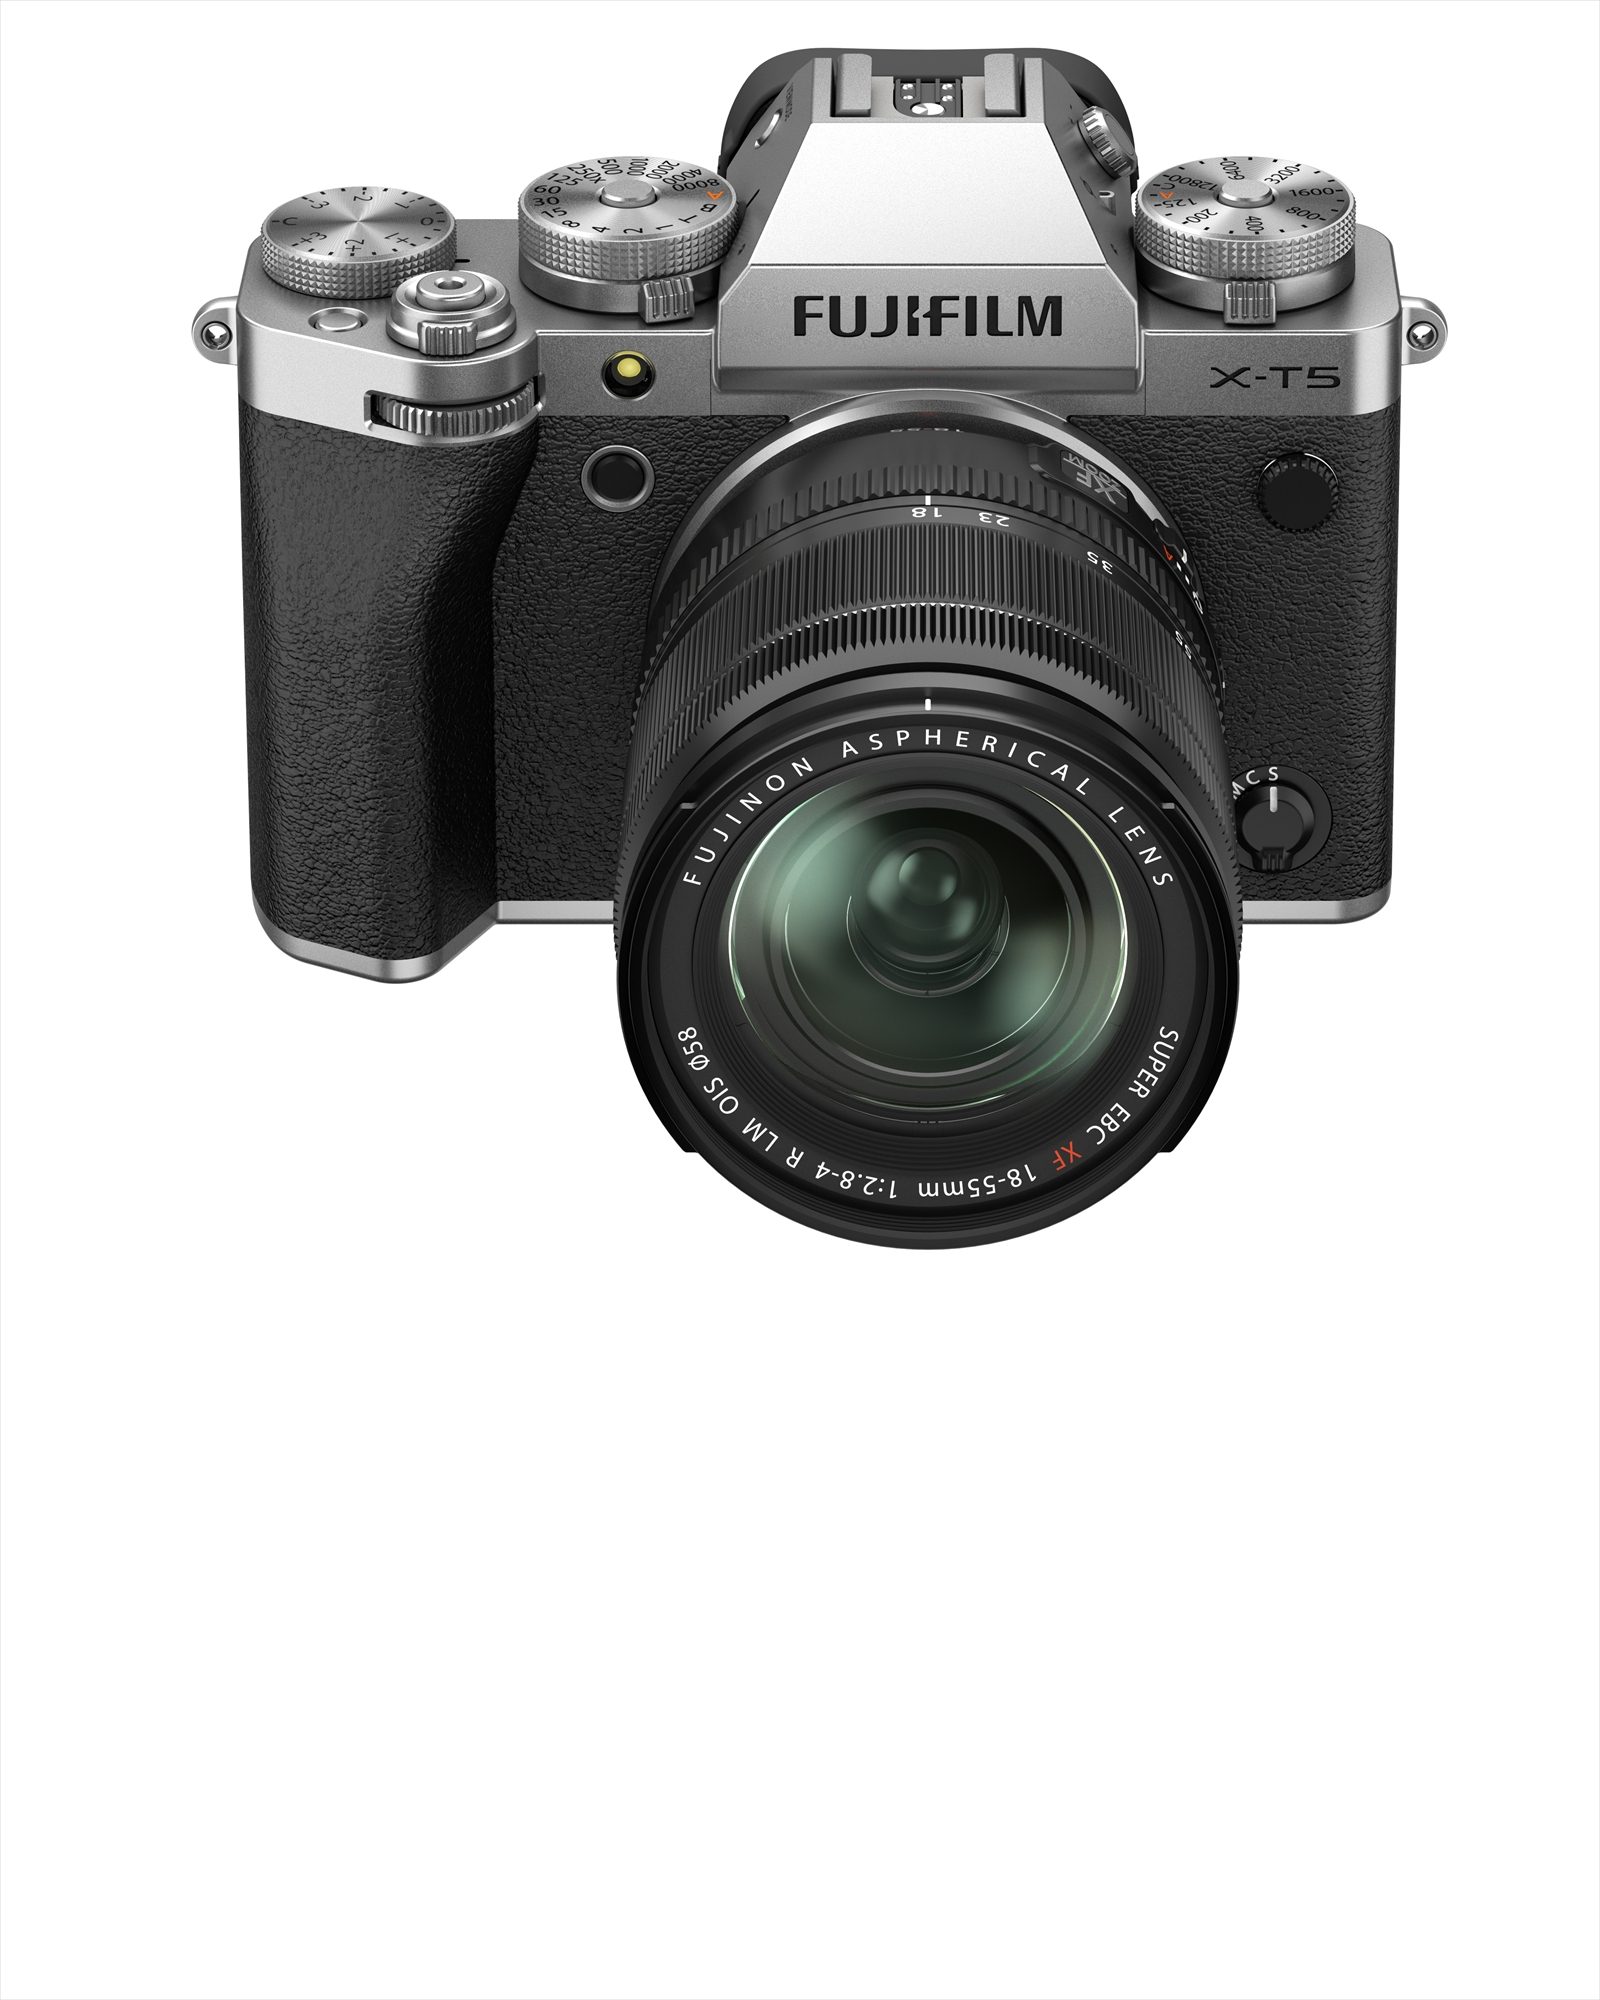 Fujifilm X-T5 Kit with 18-55mm lens (Silver)